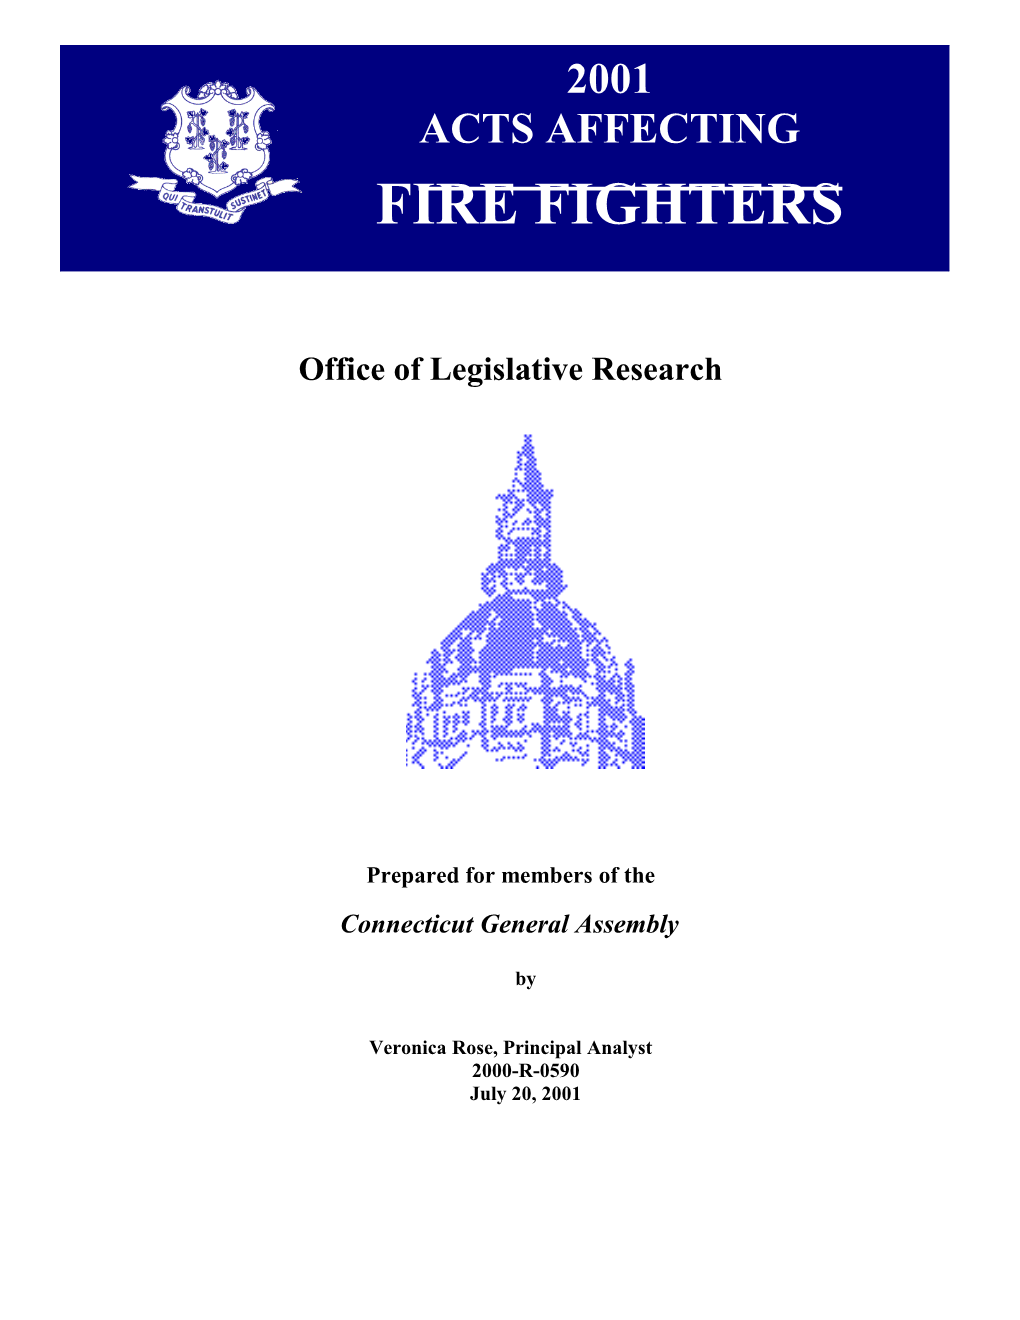 Acts Affecting Fire Fighters